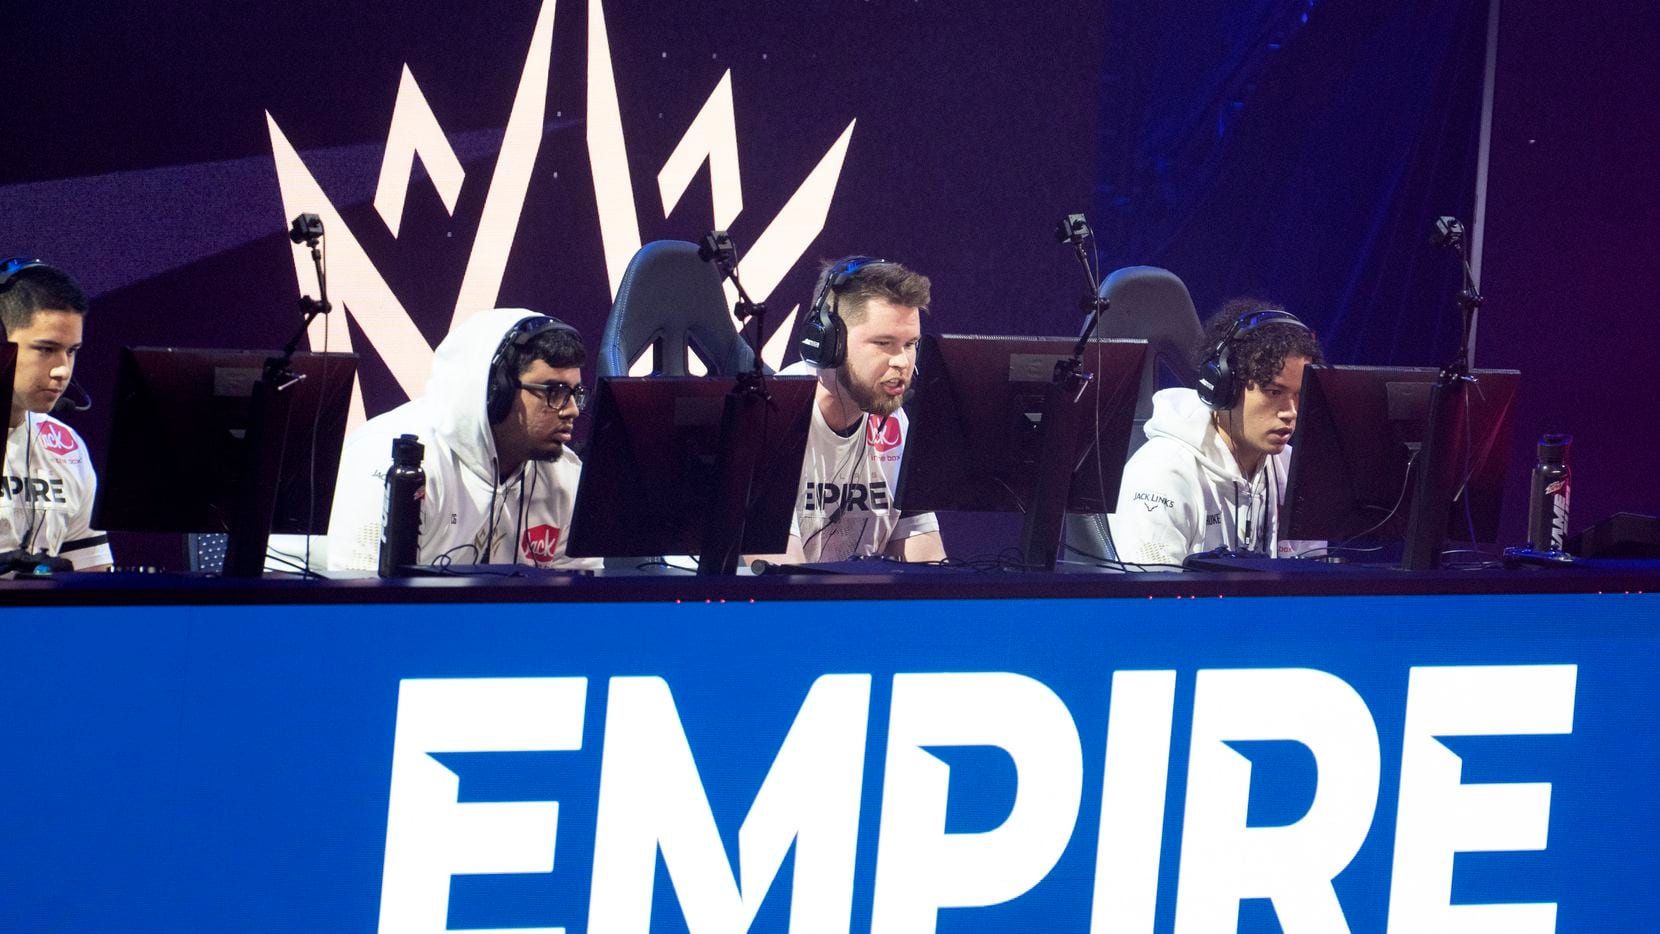 Dallas Empire competes against Atlanta Faze in the Call of Duty League Launch Weekend at the Armory in Minneapolis, Minn., January 25, 2020.